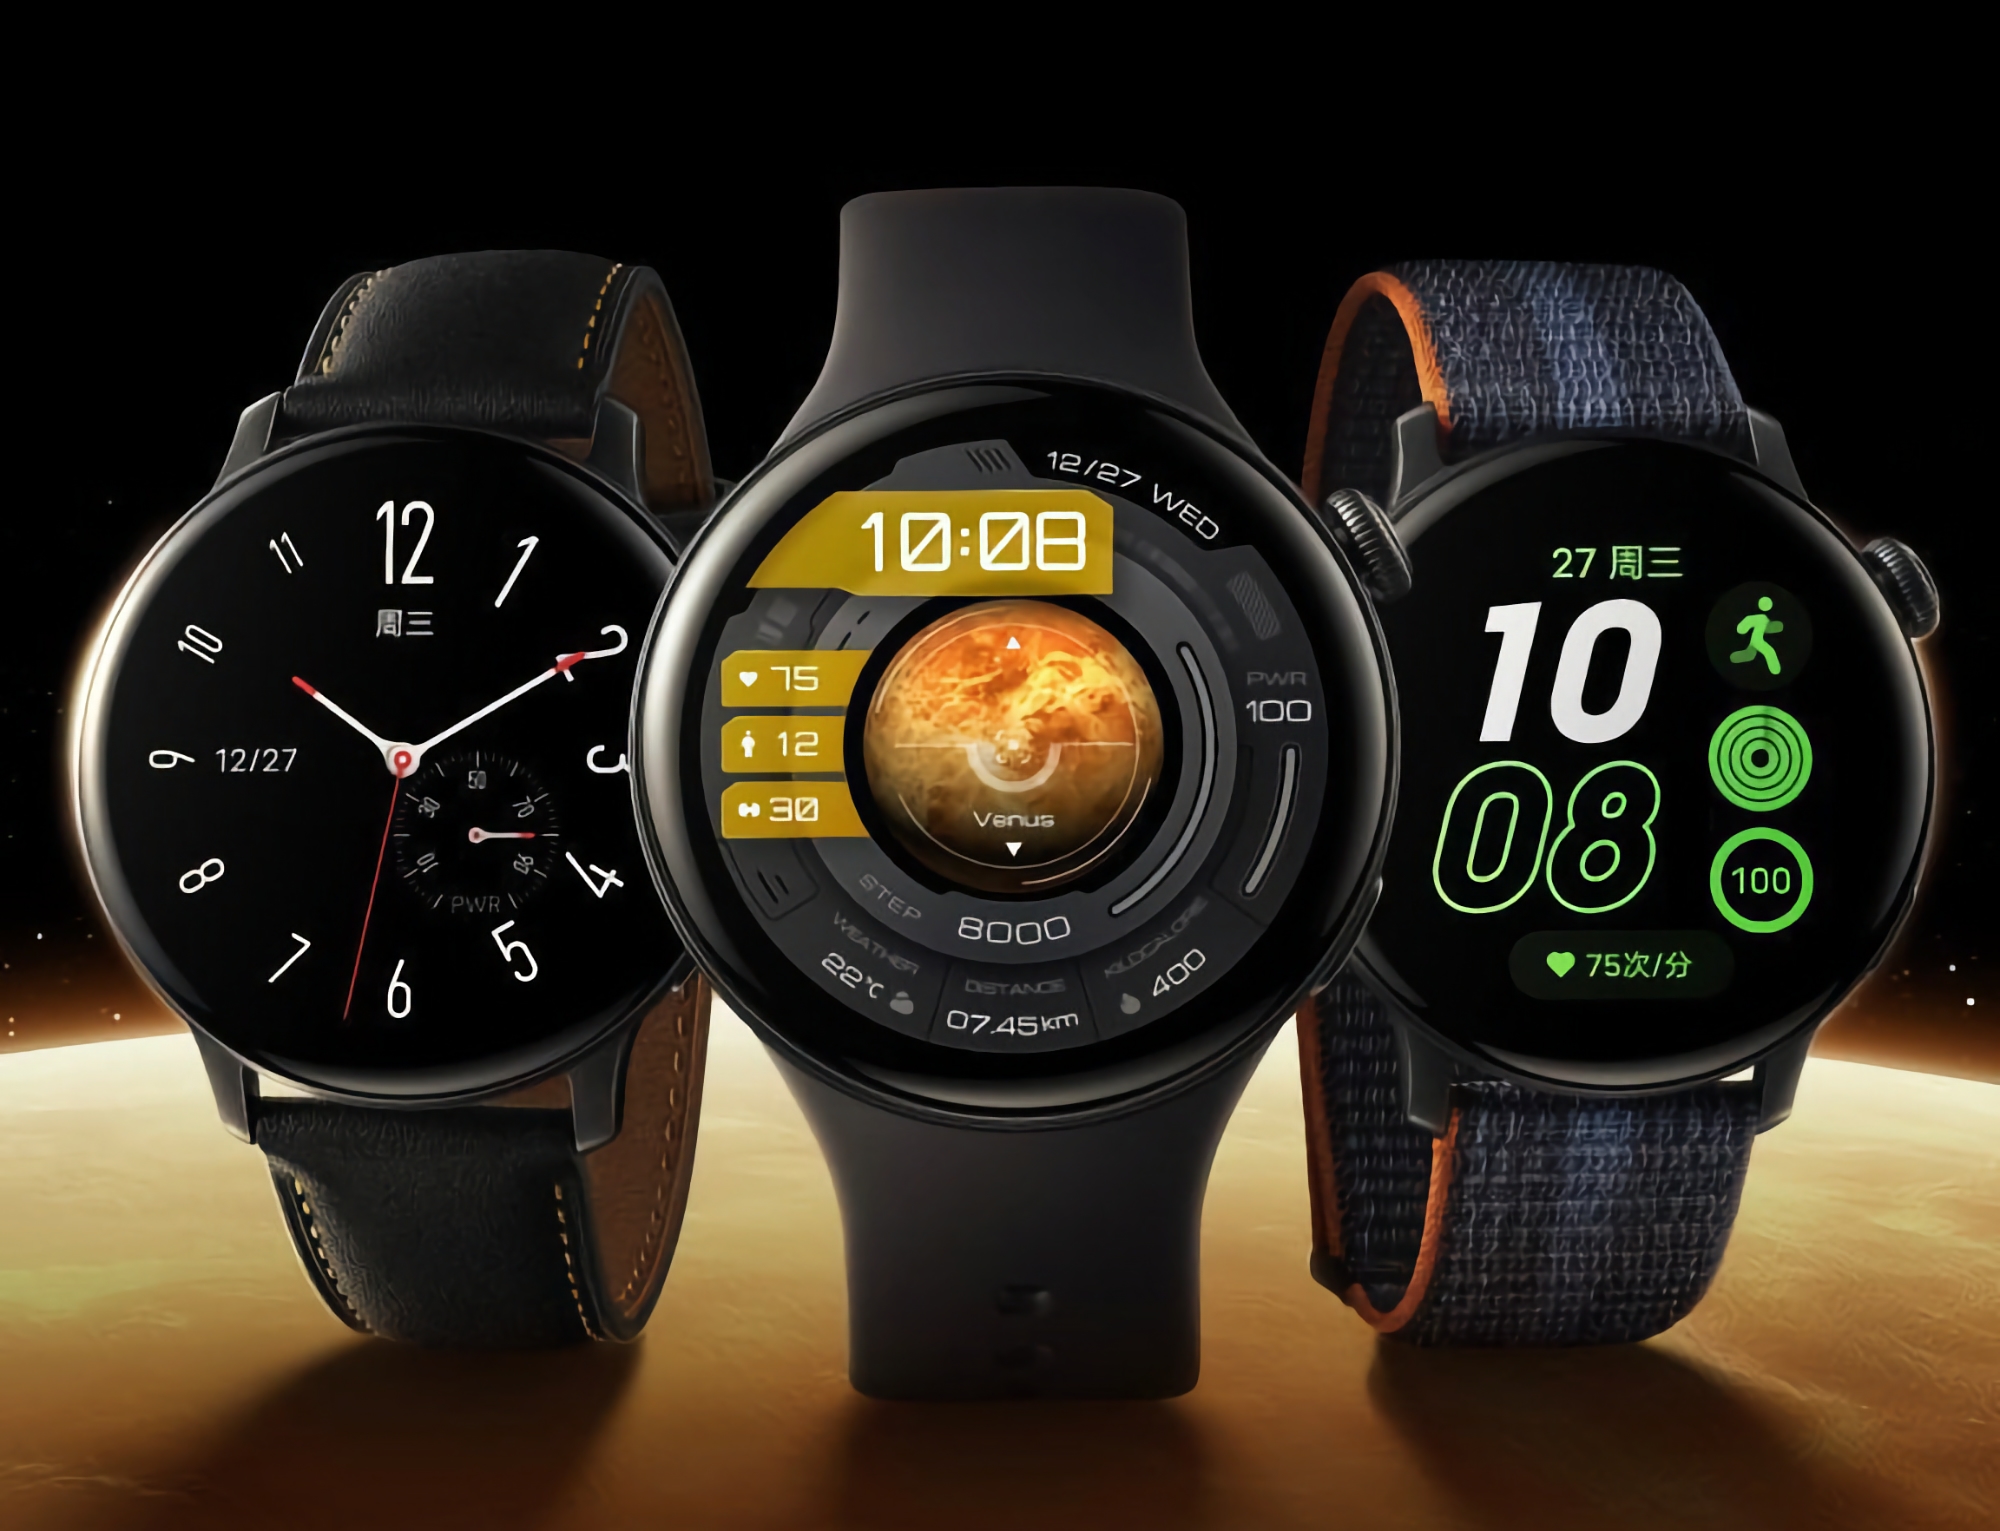 Without waiting for the presentation: vivo showed high-quality renders of iQOO Watch 